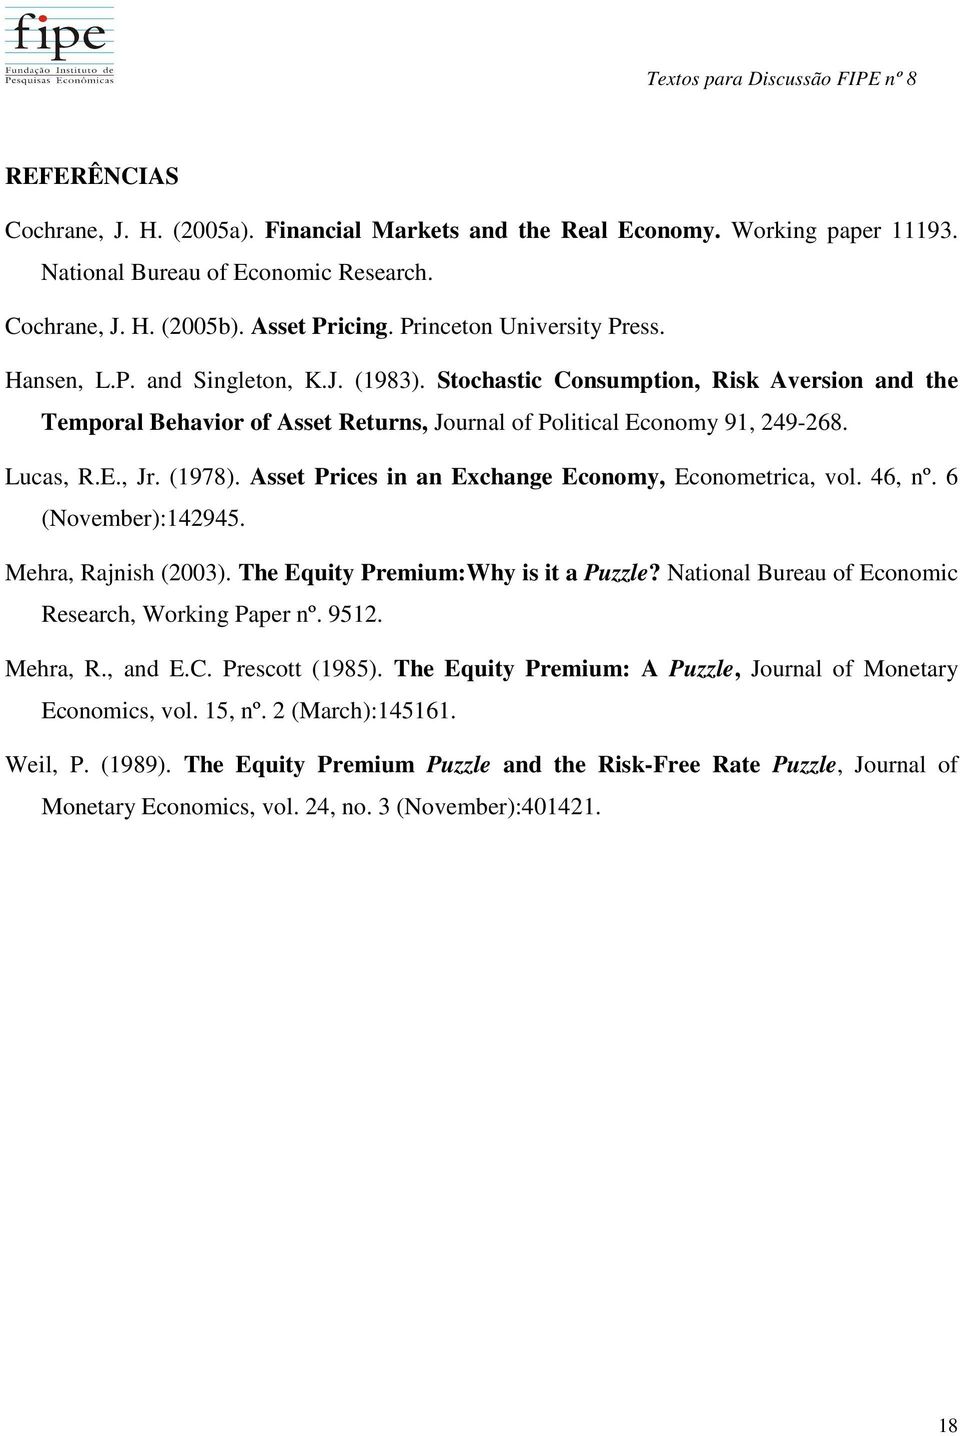 Lucas, R.E., Jr. (1978). Asset Prices in an Exchange Economy, Econometrica, vol. 46, nº. 6 (November):142945. Mehra, Rajnish (2003). The Equity Premium:Why is it a Puzzle?